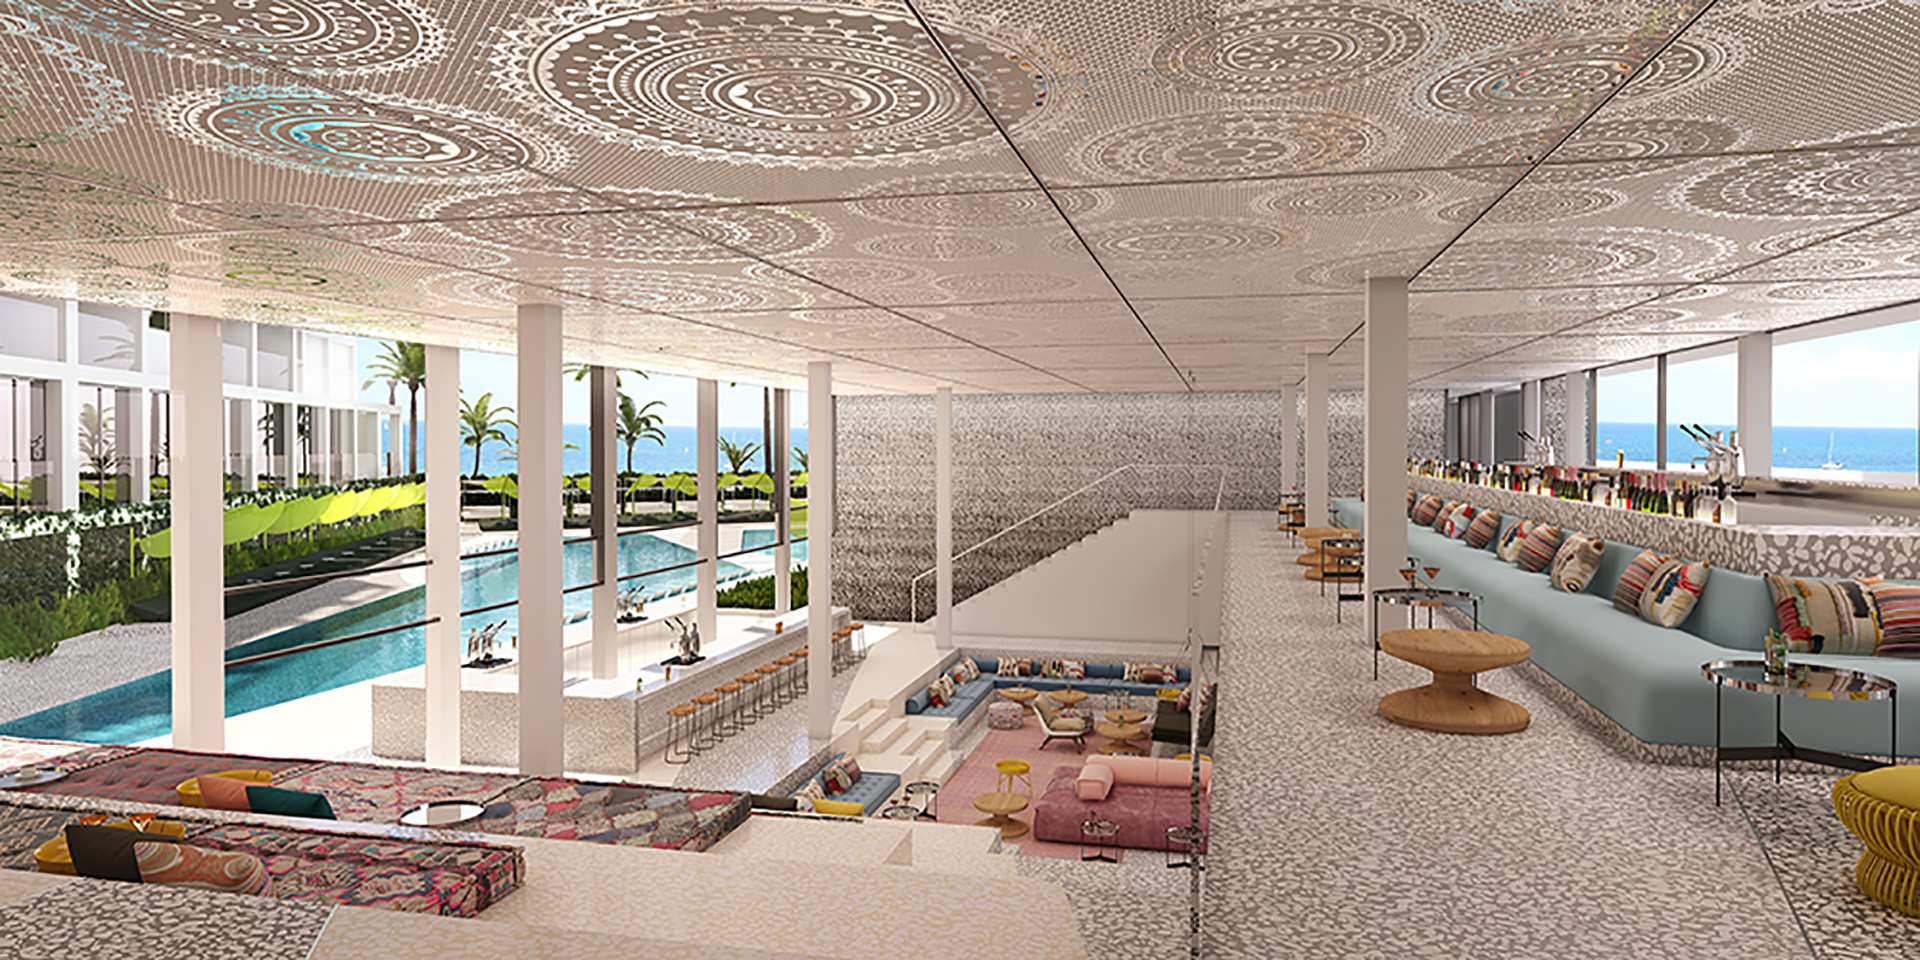 W Hotels Worldwide has planned to open the W Ibiza in the beachfront neighborhood of Santa Eulalia del Ro in summer 2019